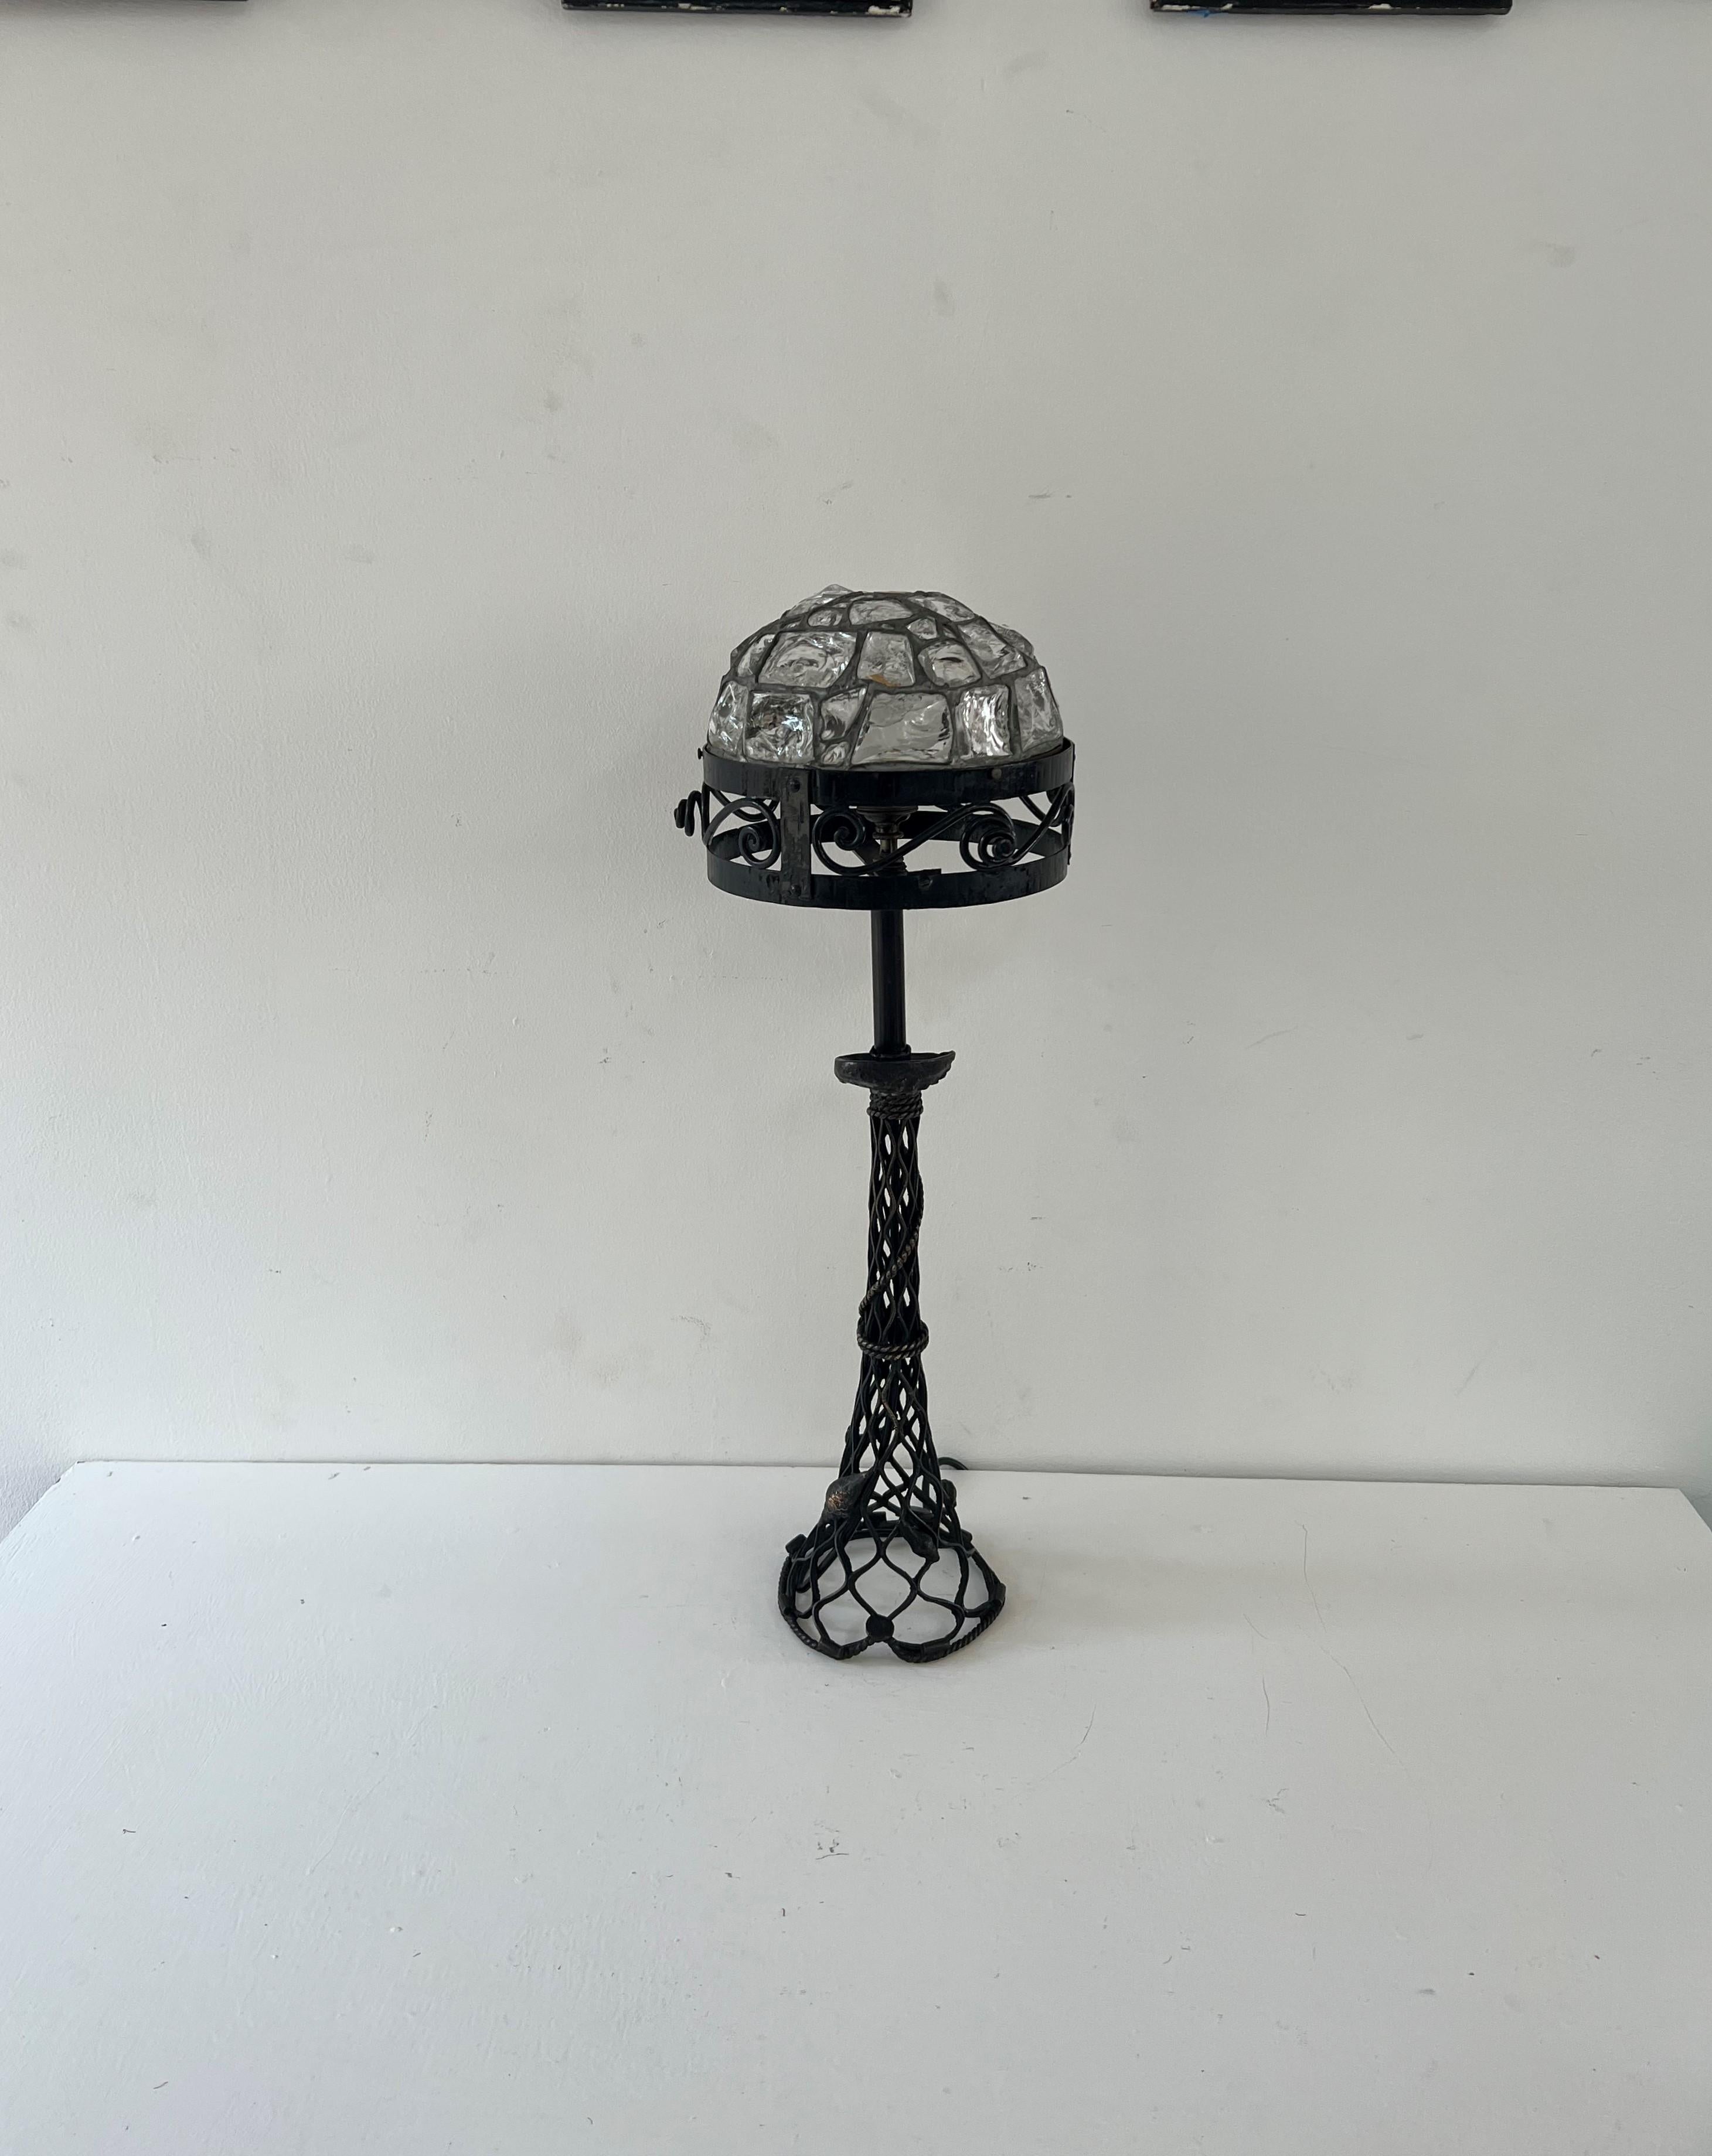 Jugendstil or Art Nouveau table lamp, most likely Austrian circa 1910.
The base has been cast or forged with sealife, the metal is most likely bronze as it shines golden in some places where the patination has rubbed off.